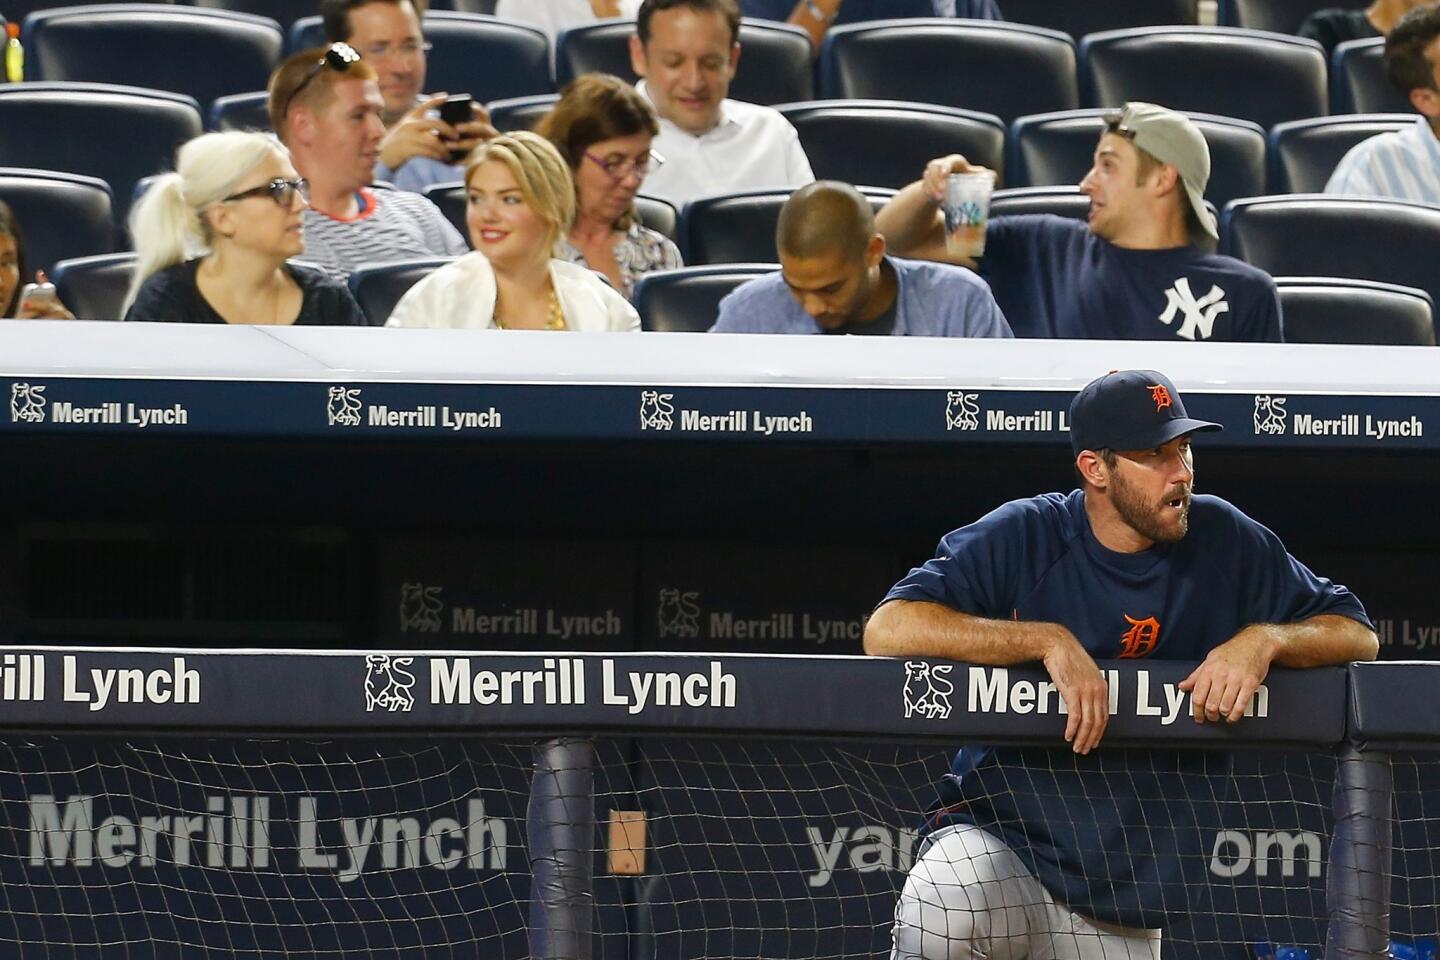 Tigers' Justin Verlander on dating Kate Upton: 'I'm in a great spot